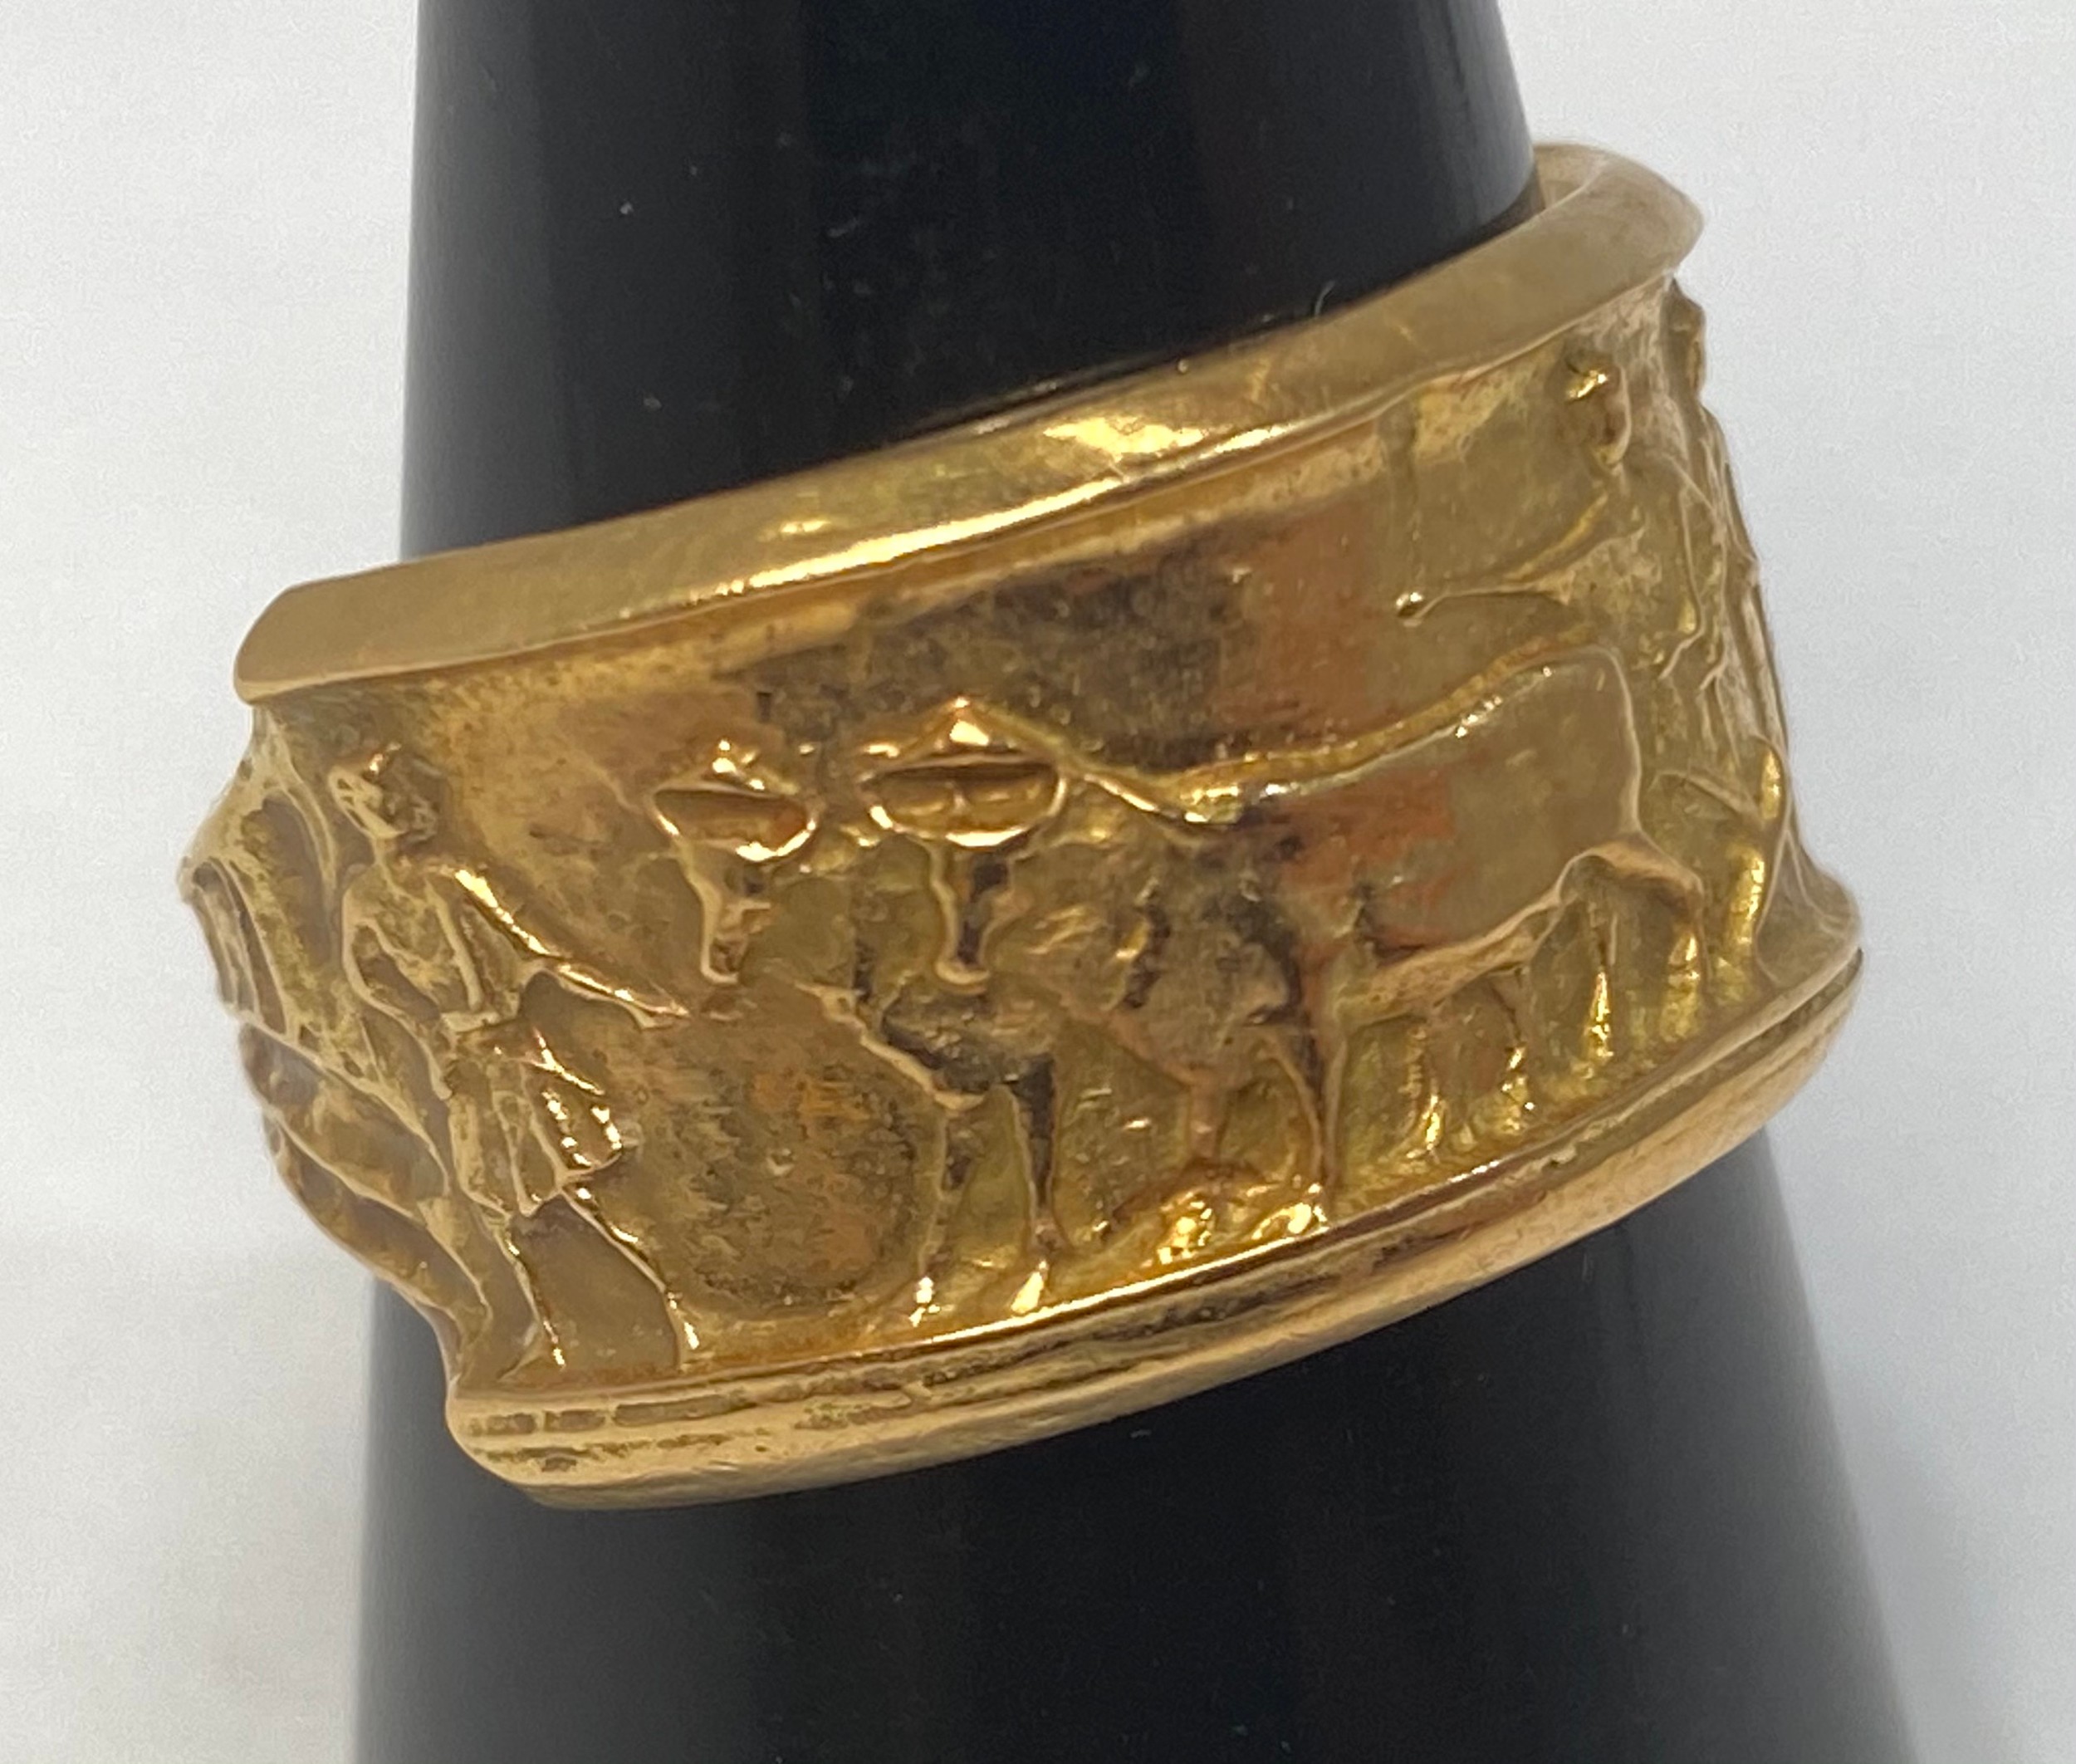 An 18ct gold ring, cast with bulls and robed figures, weighs 7.9 grams, finger size S.